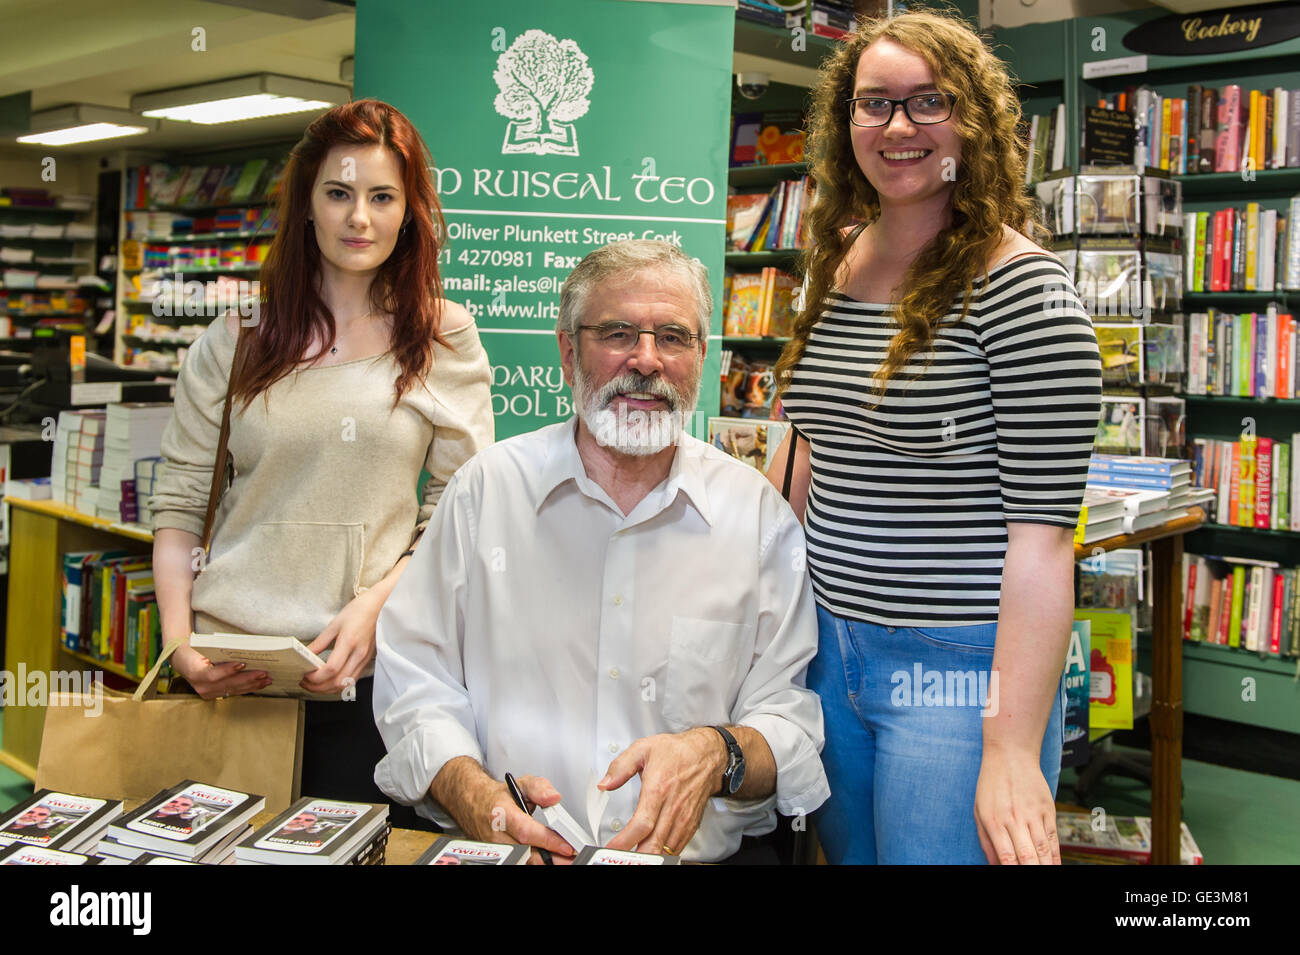 Cork, Ireland. 22nd July, 2016. Gerry Adams, the leader of Political Party Sinn Féin was in Liam Ruiseal's Bookshop in Oliver Plunkett Street, Cork, on Friday 22nd July, signing his new book - 'My Little Book of Tweets'. Sarah O'Sullivan from Beal Na Bláth and Aisling O'Leary from Ballincollig got their copies of the book signed by Mr Adams. Credit: Andy Gibson/Alamy Live News. Stock Photo